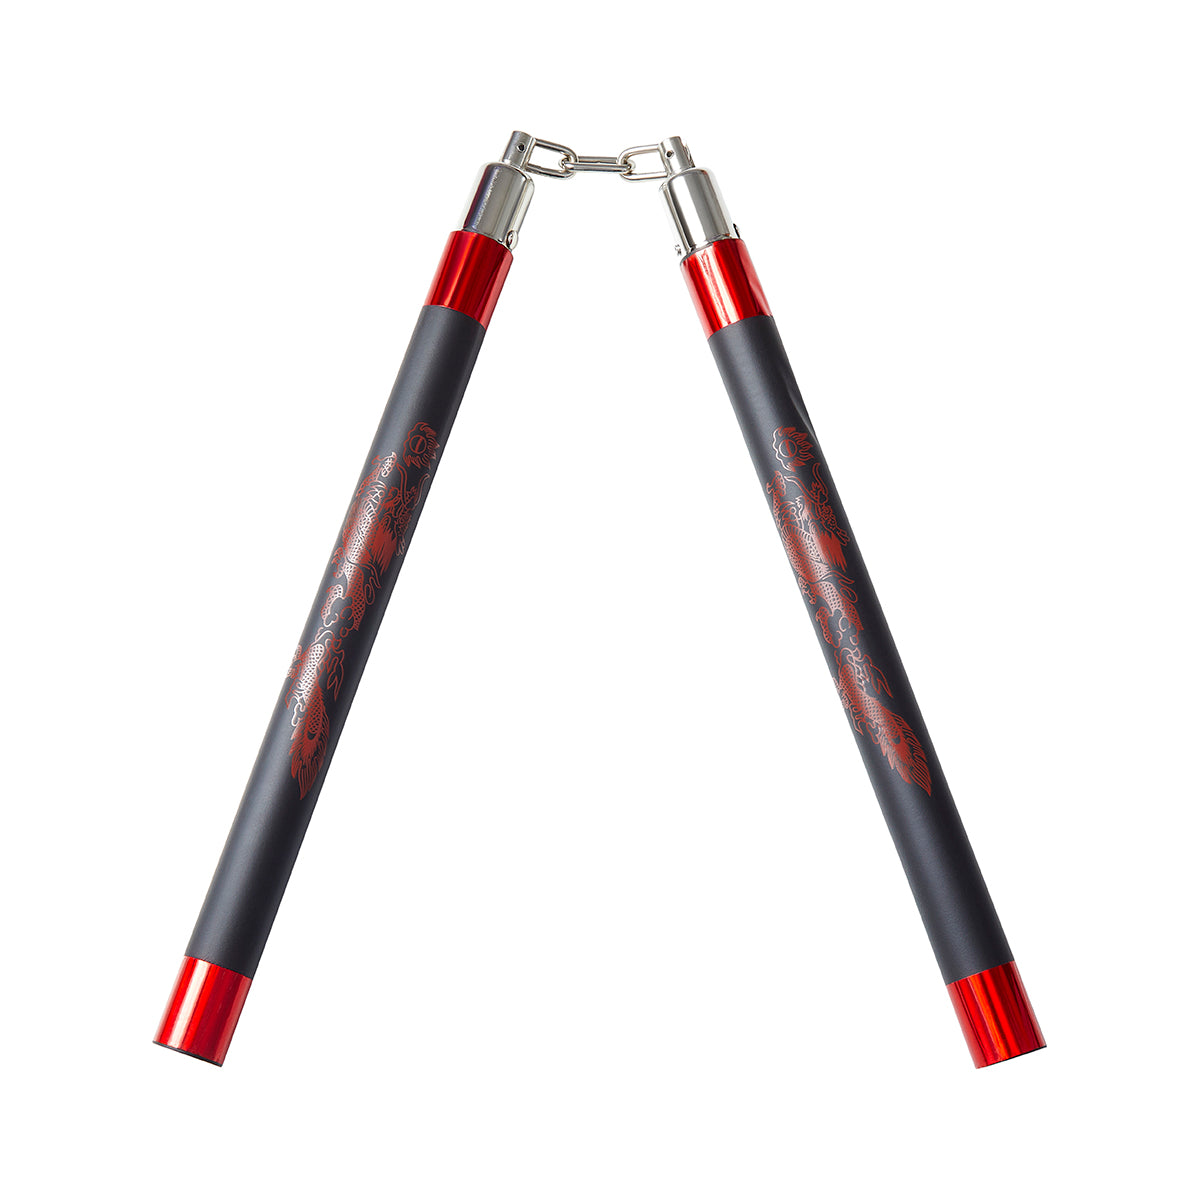 Deluxe Foam Speed Nunchucks With Chain - Black/Red - 11"